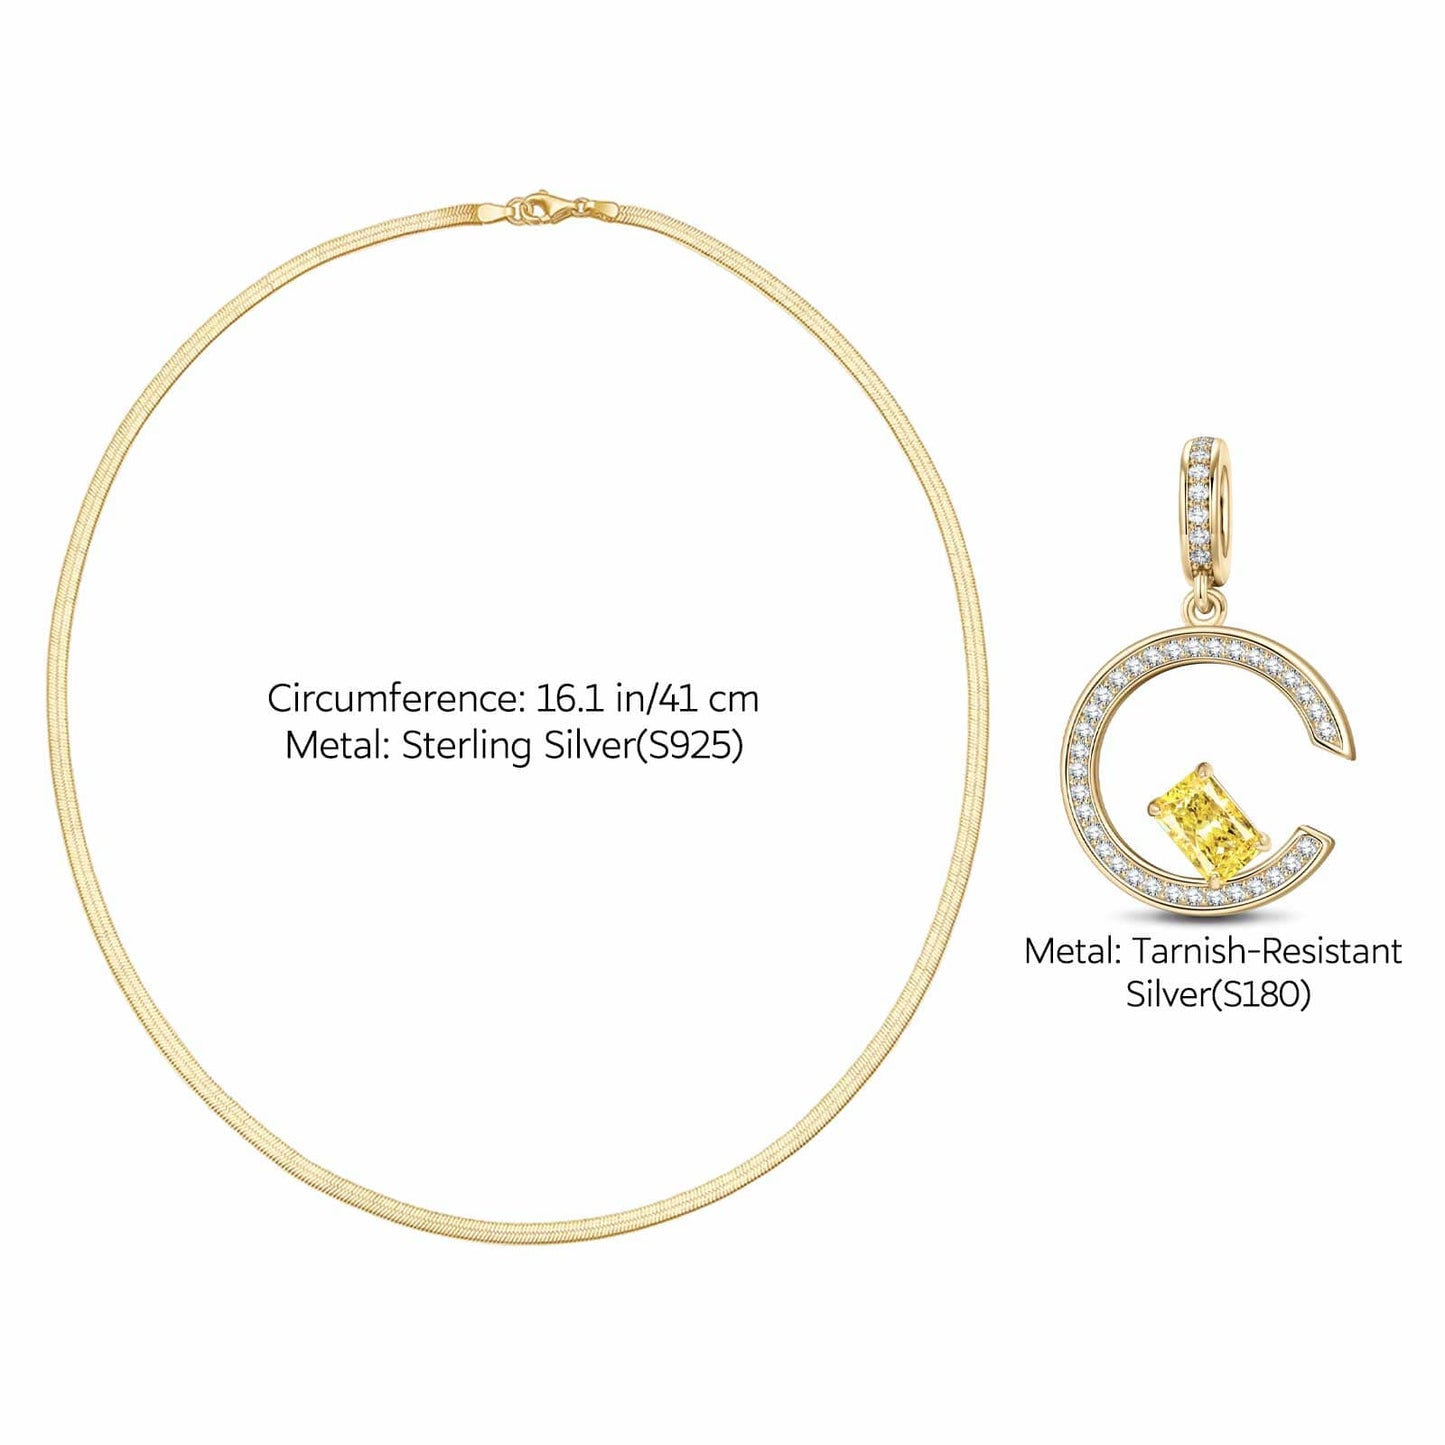 Sterling Silver Skylight Sparkle Charms Necklace Set In 14K Gold Plated